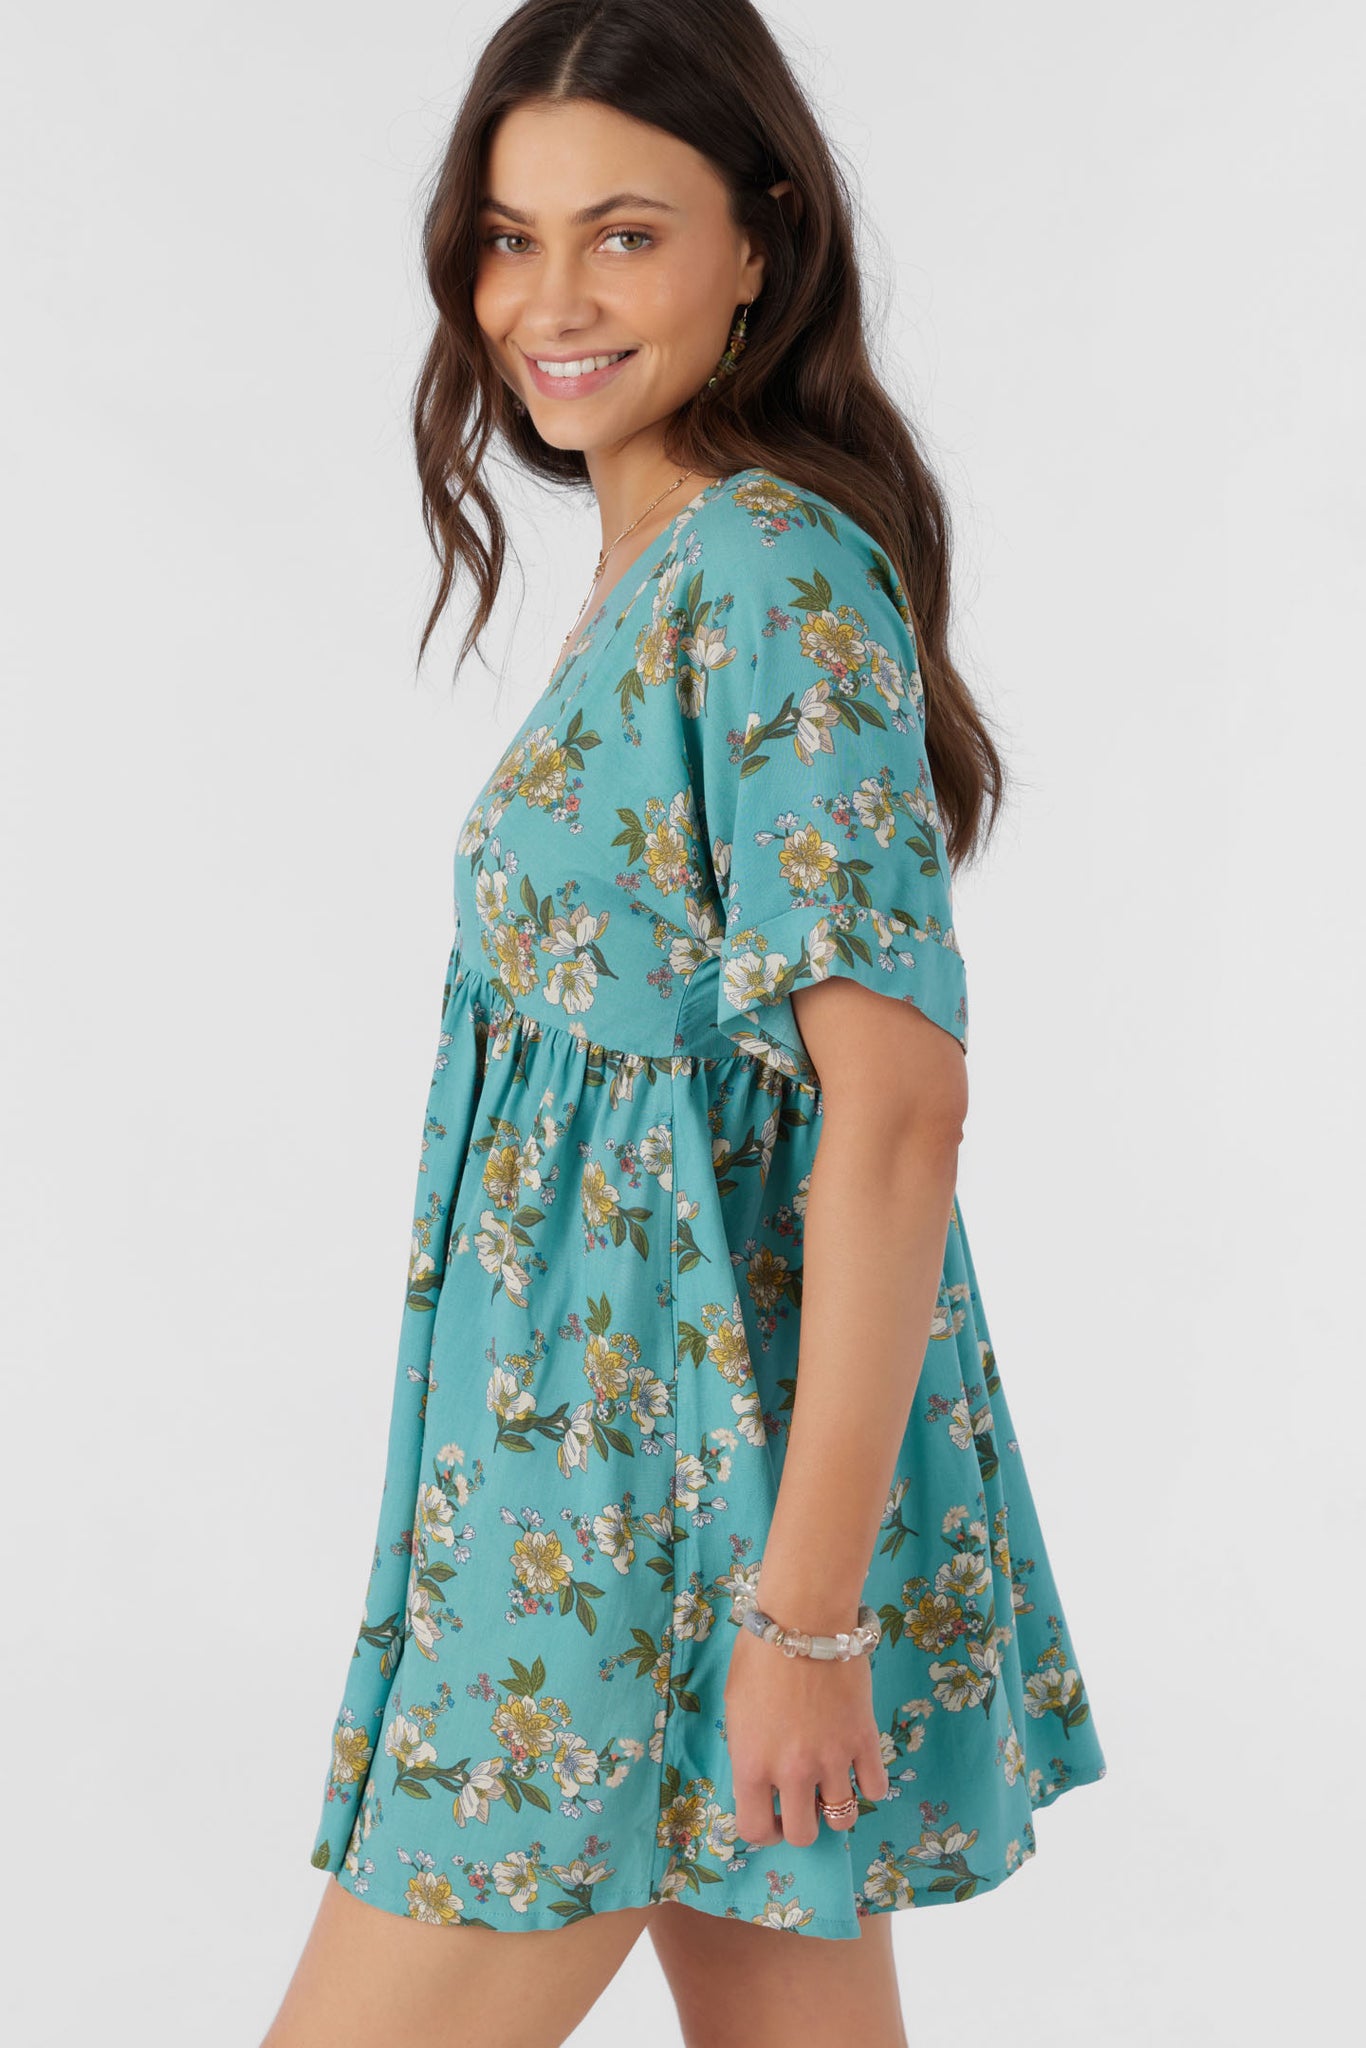 ROSEMARY MARLOW FLORAL DRESS